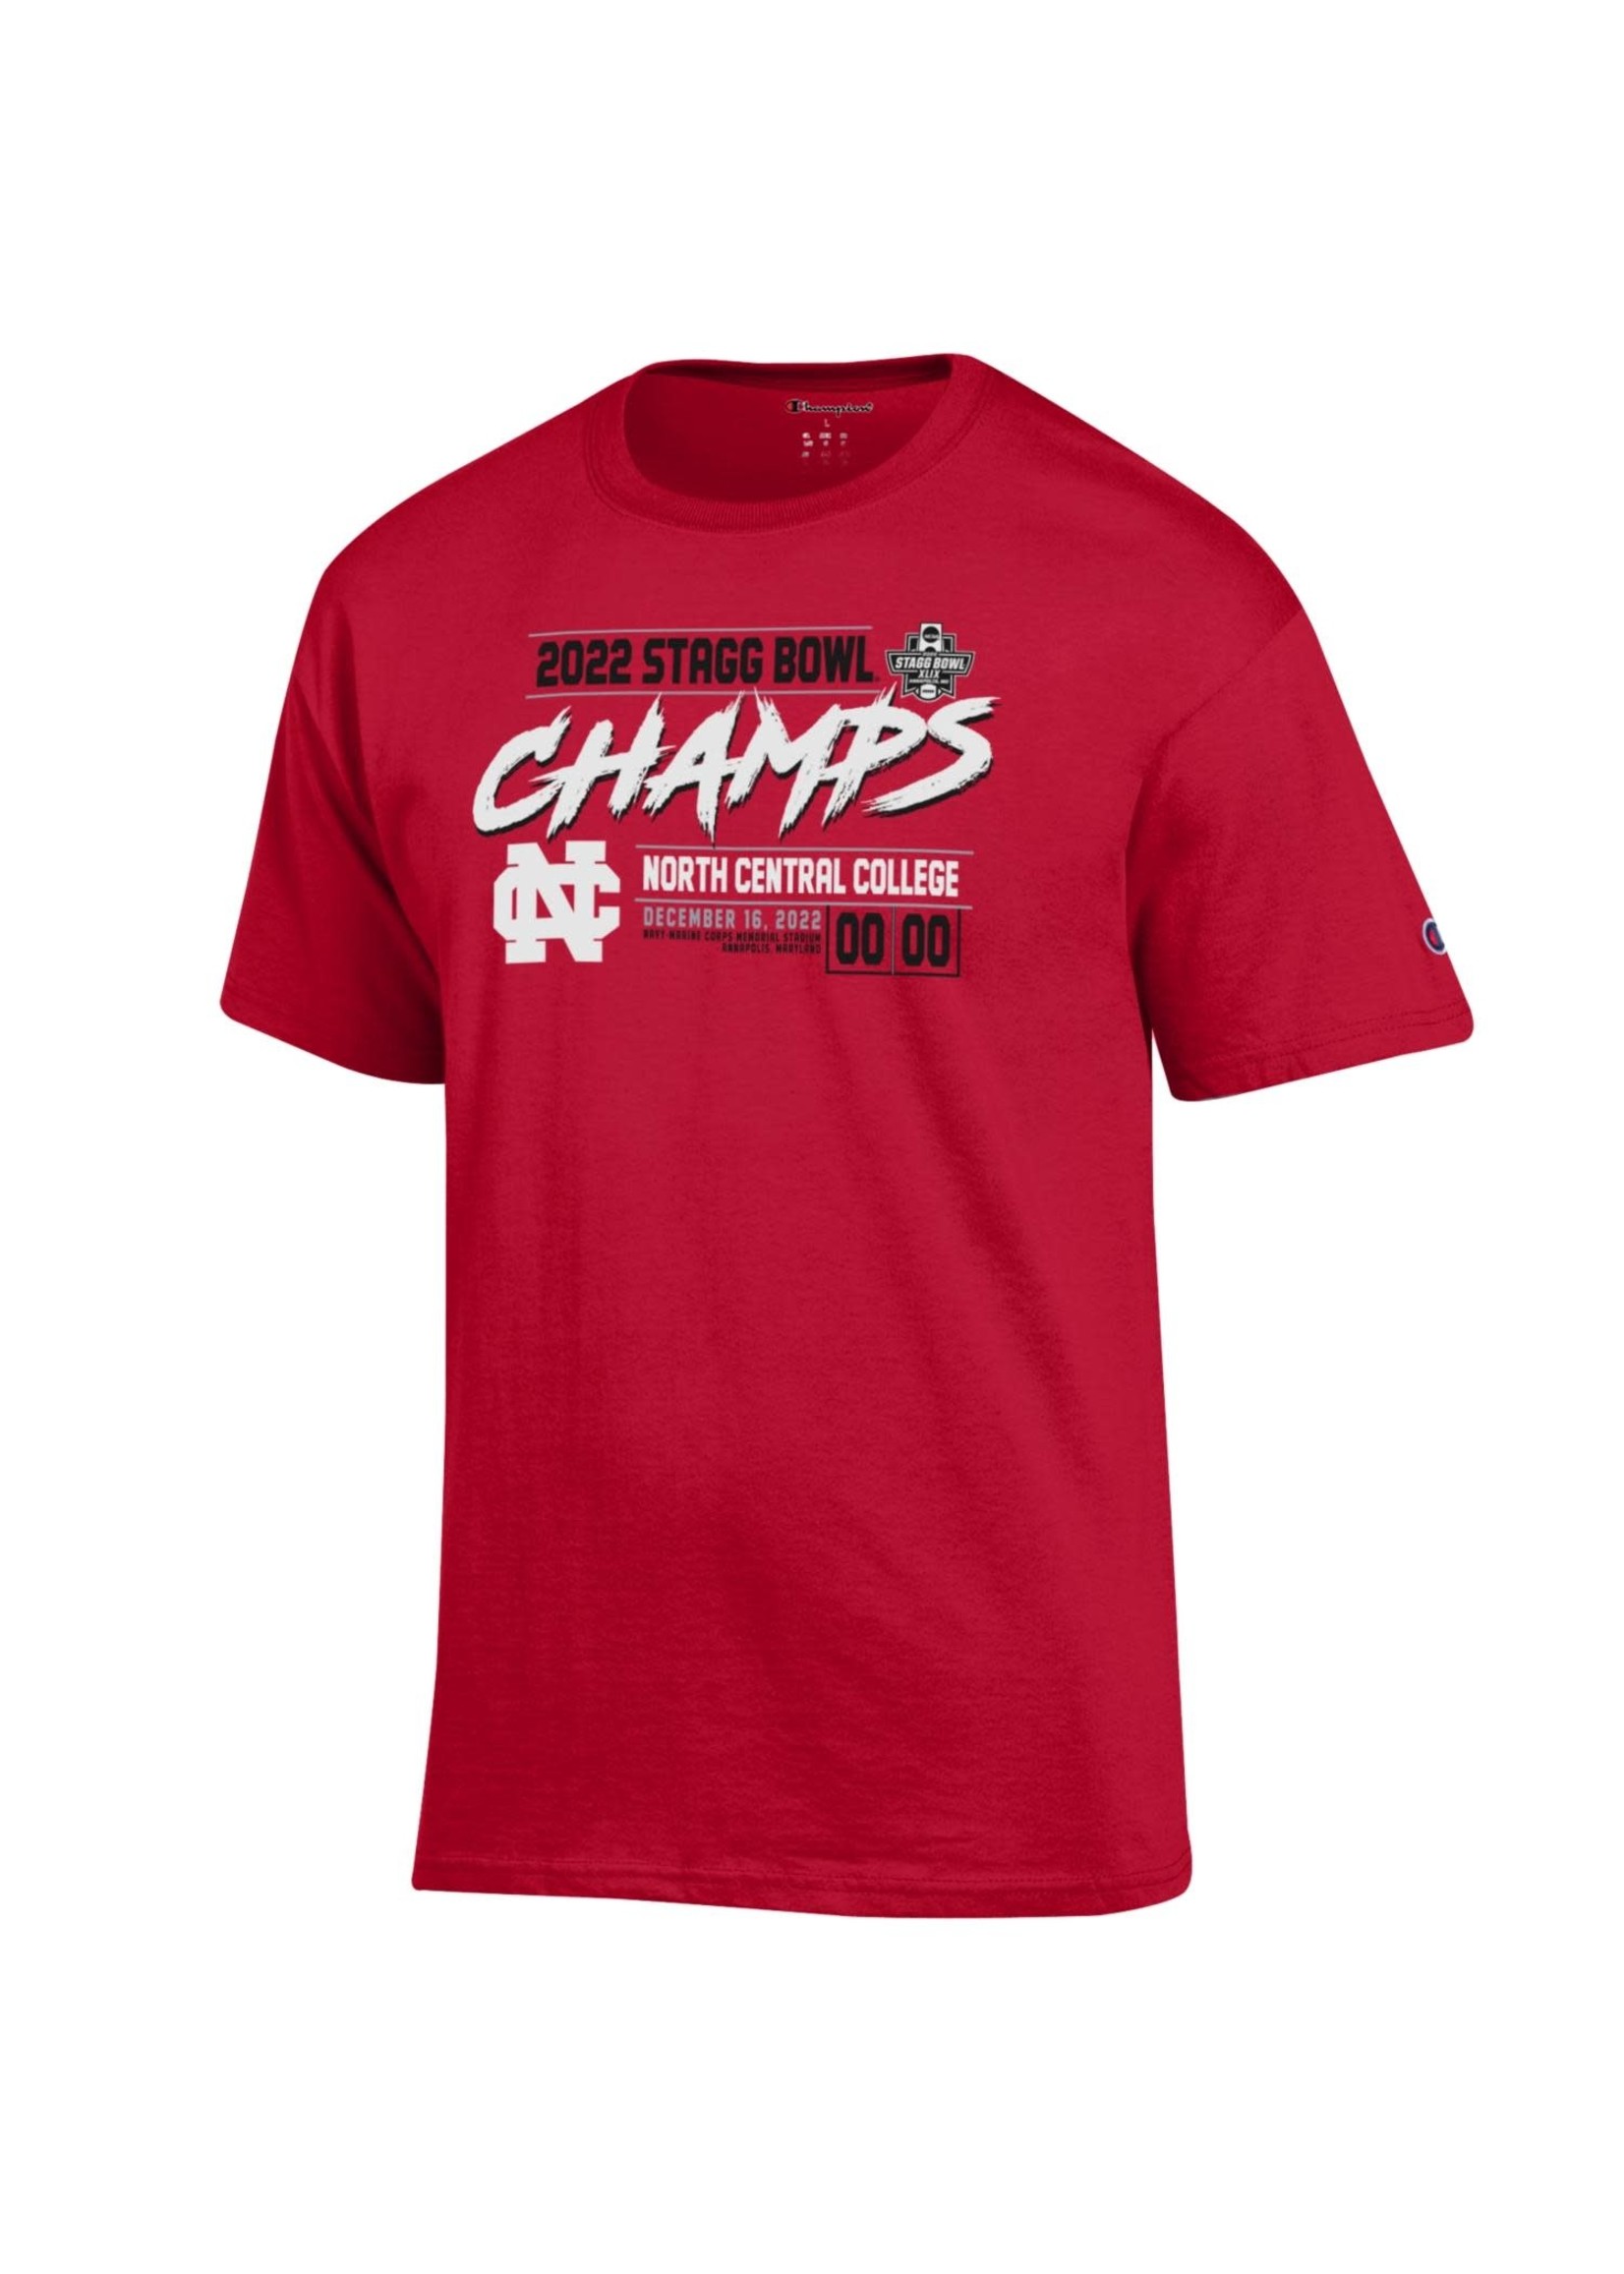 Champion 2022 Stagg Bowl Tee w/ Score by Champion